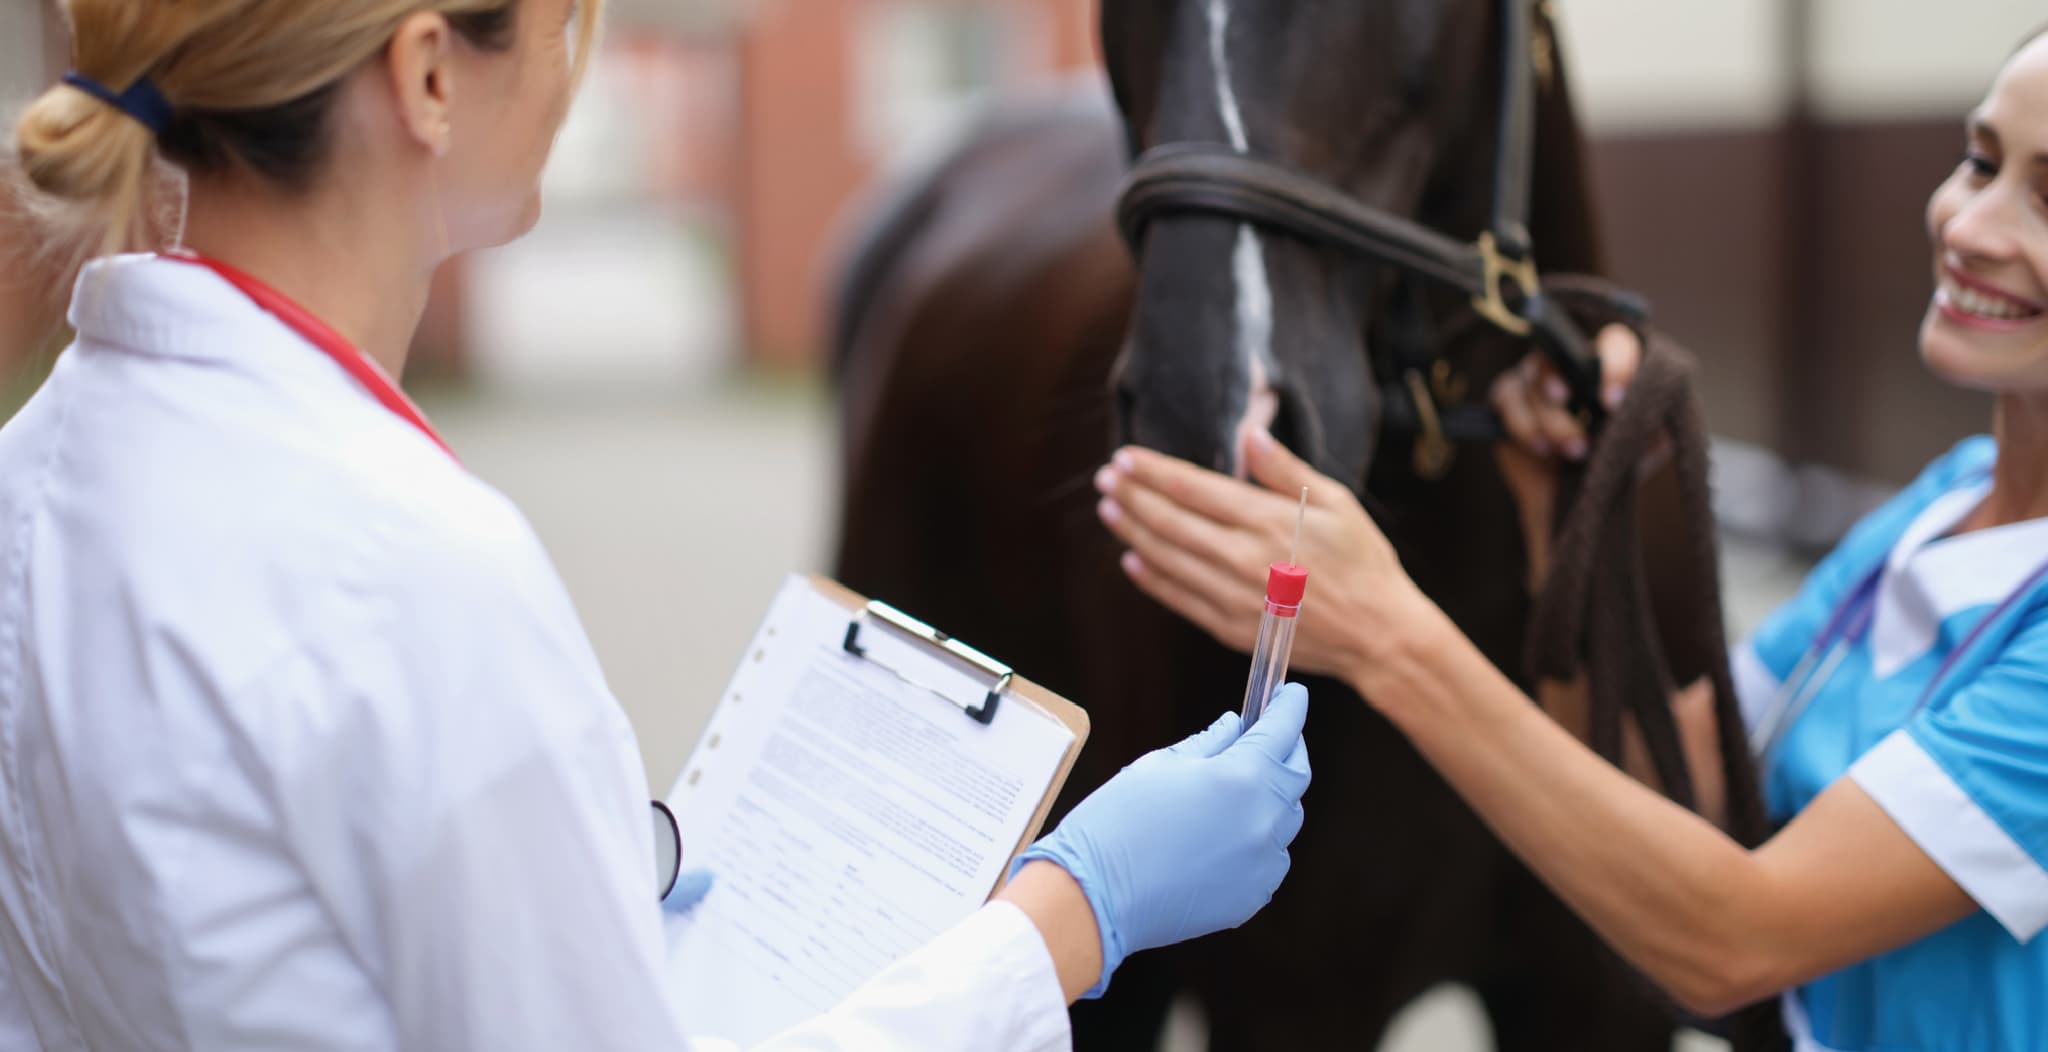 There are many benefits to non-steroidal anti-inflammatory drugs as they help horses in pain and reduce inflammation